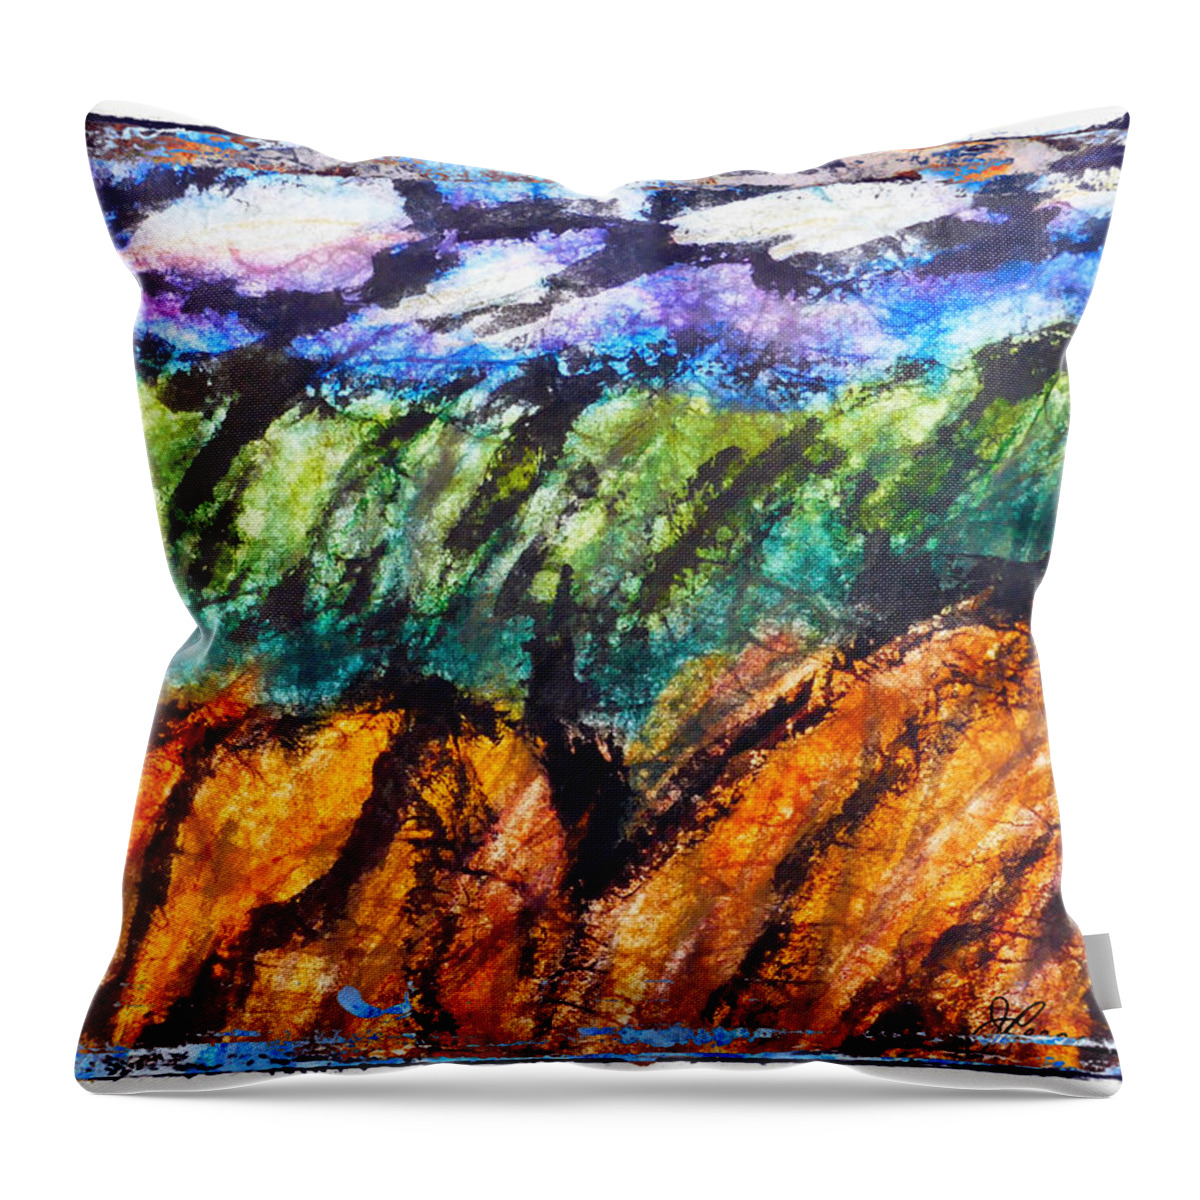 Soft Colors Throw Pillow featuring the painting Autumn Memories by Joan Reese